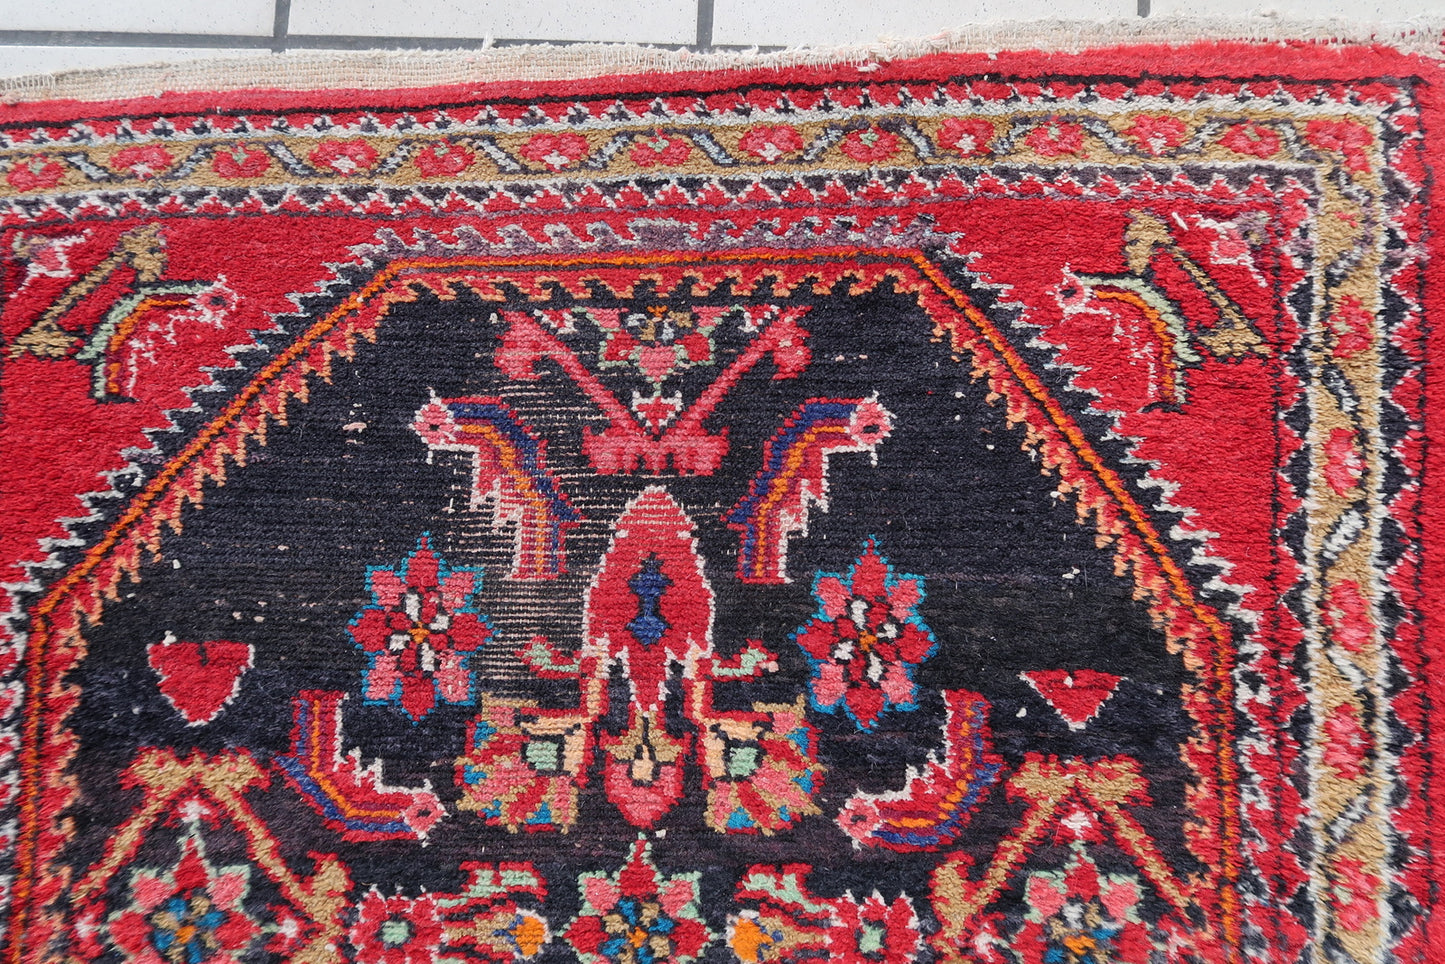 Close-up of bright red color on Handmade Vintage Persian Hamadan Rug - Detailed view highlighting the vibrant red hues.